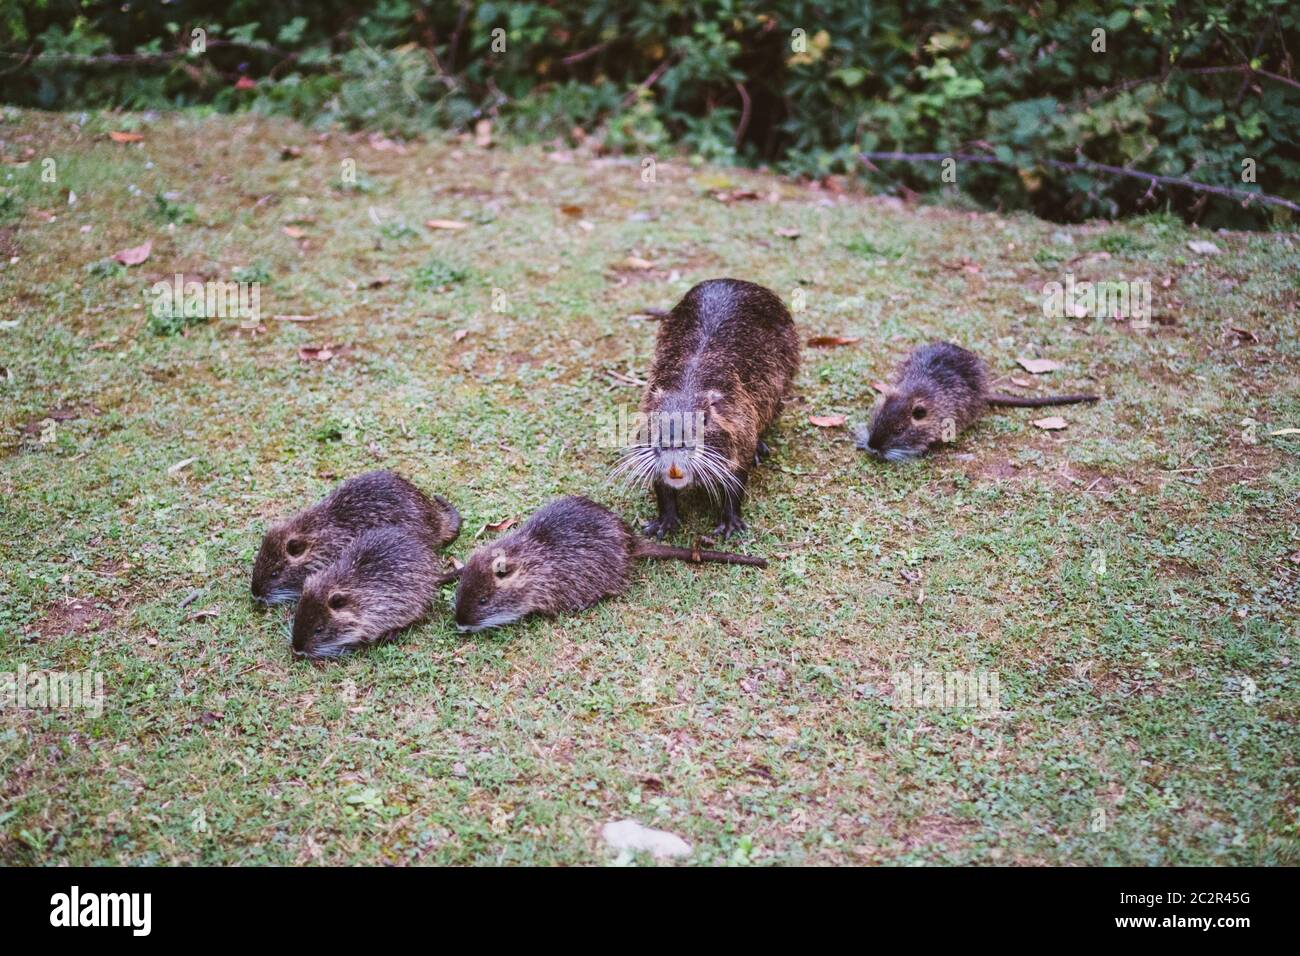 Animal families in natural environment. Wild baby coypu Myocastor Coypus following his mother. Coypu family with babies resting. Stock Photo